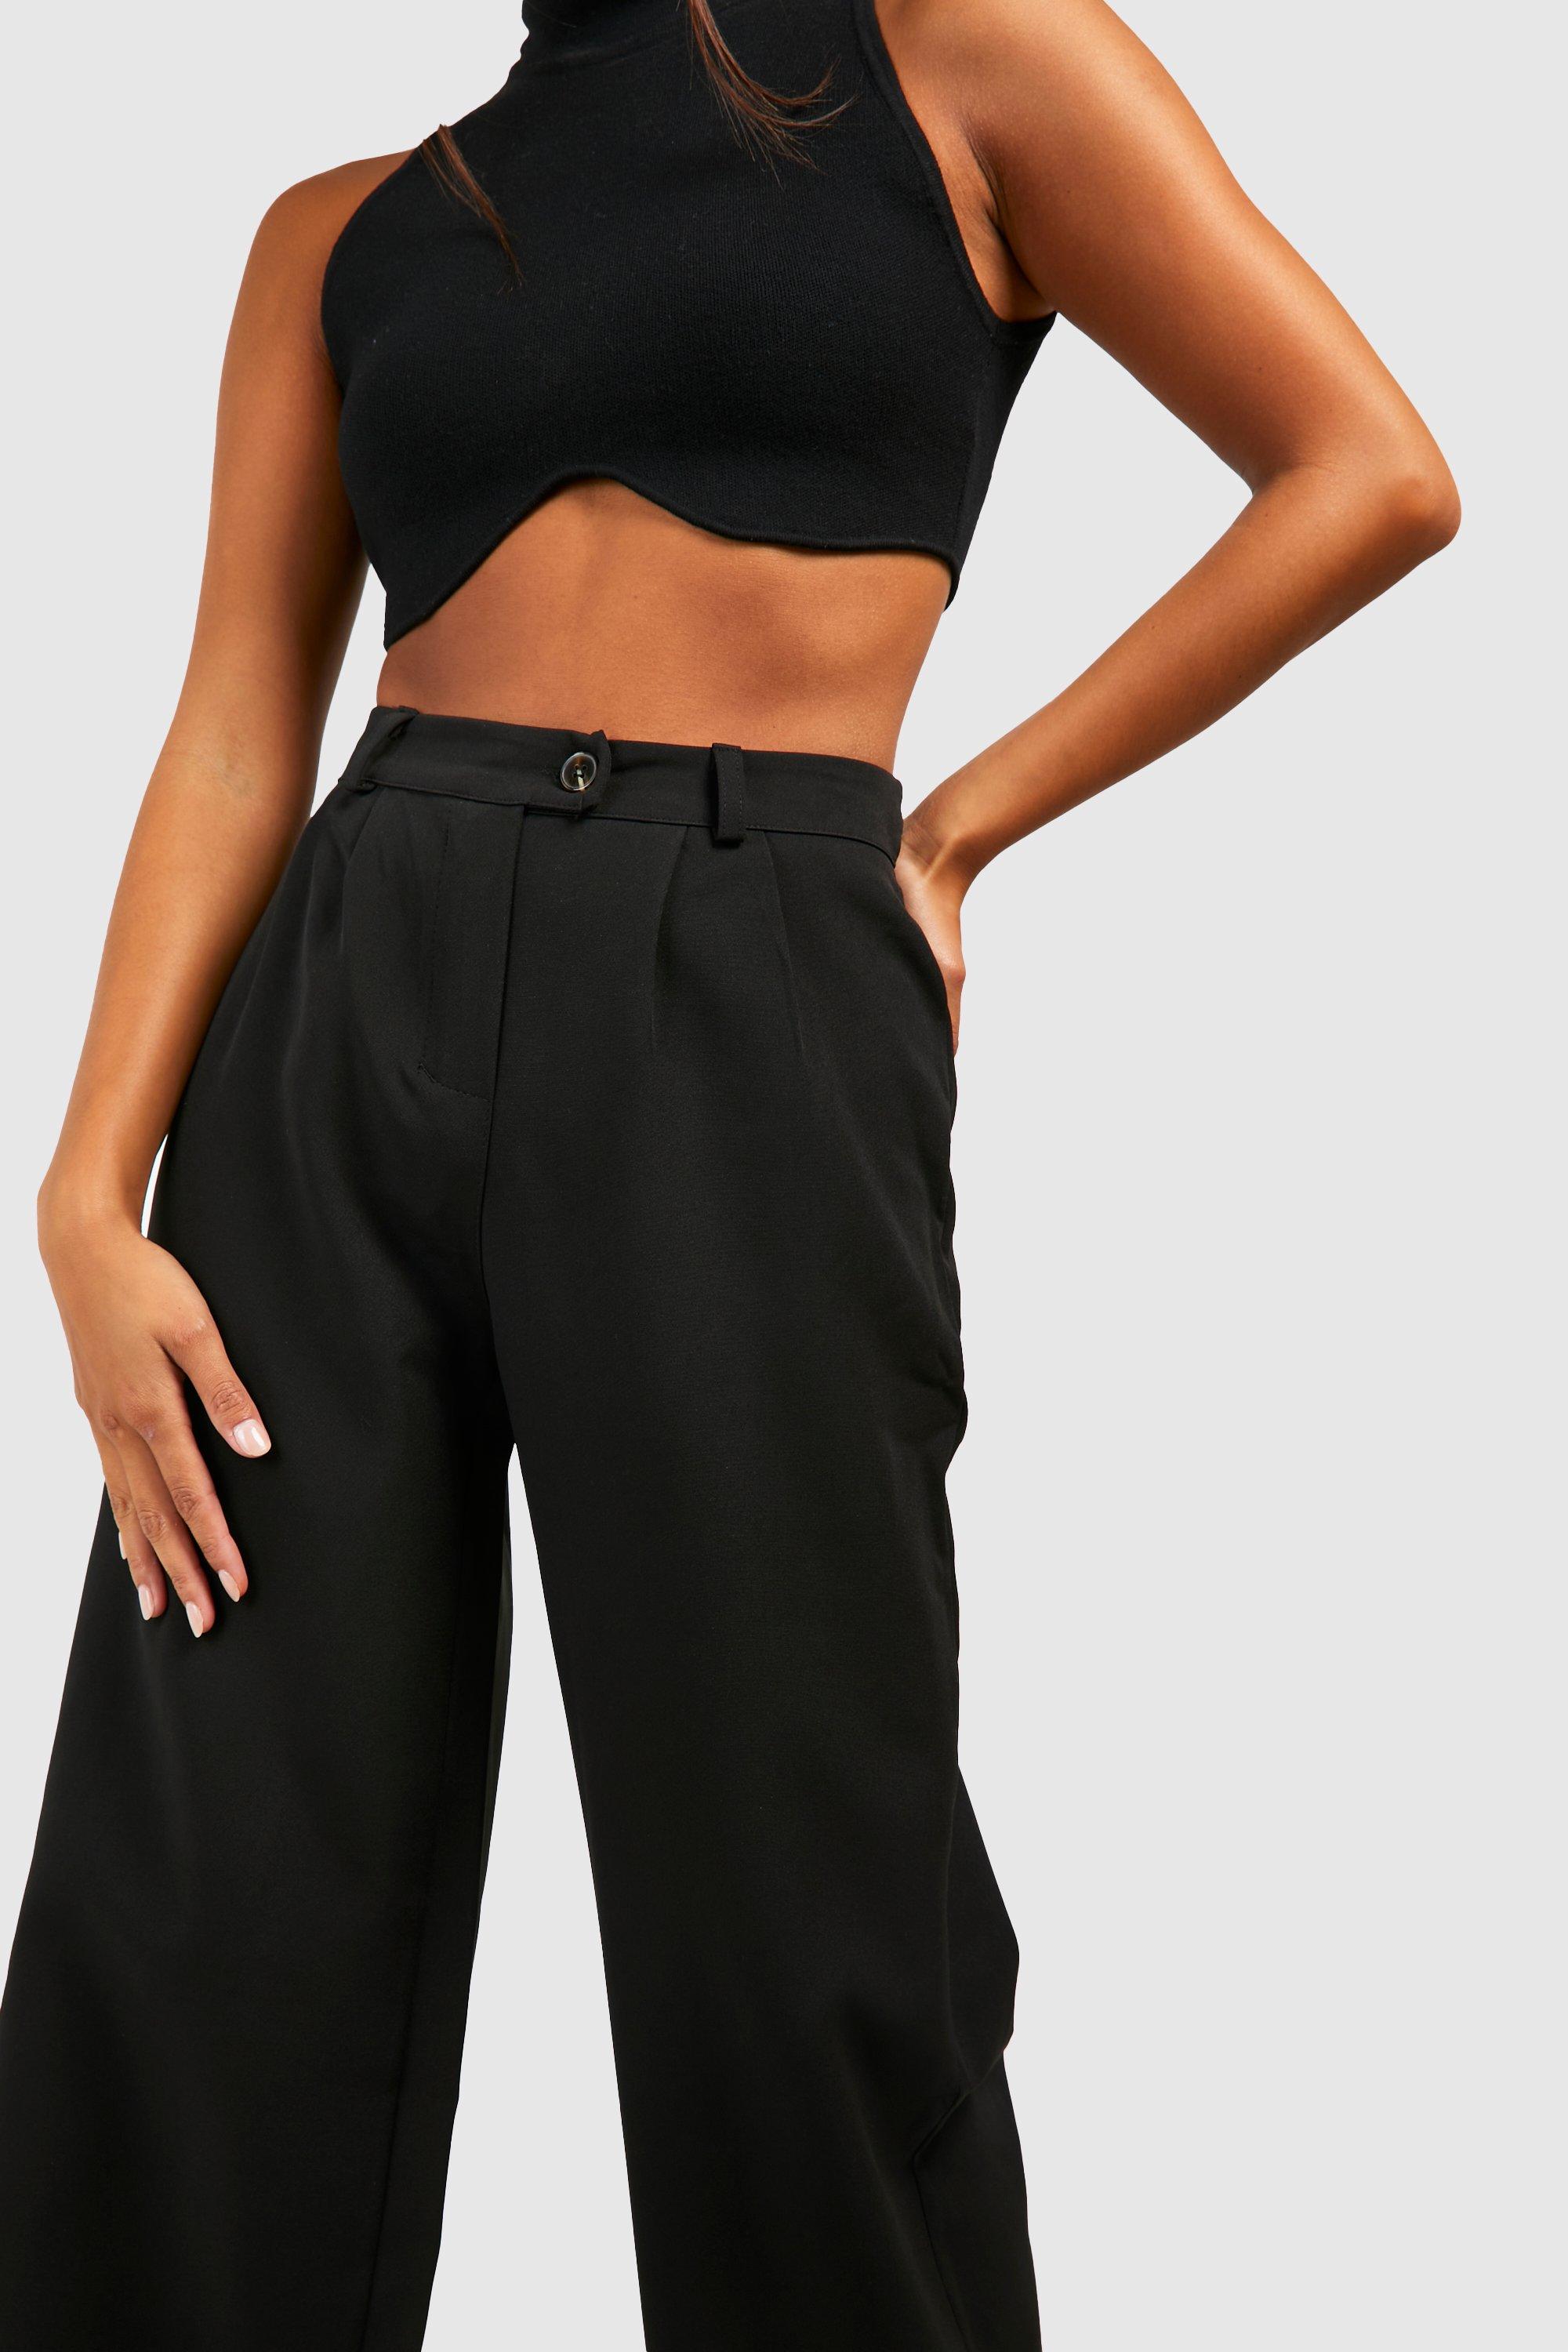 Buy Lipsy Black Petite Wide Leg Woven Smart Trousers from Next Luxembourg